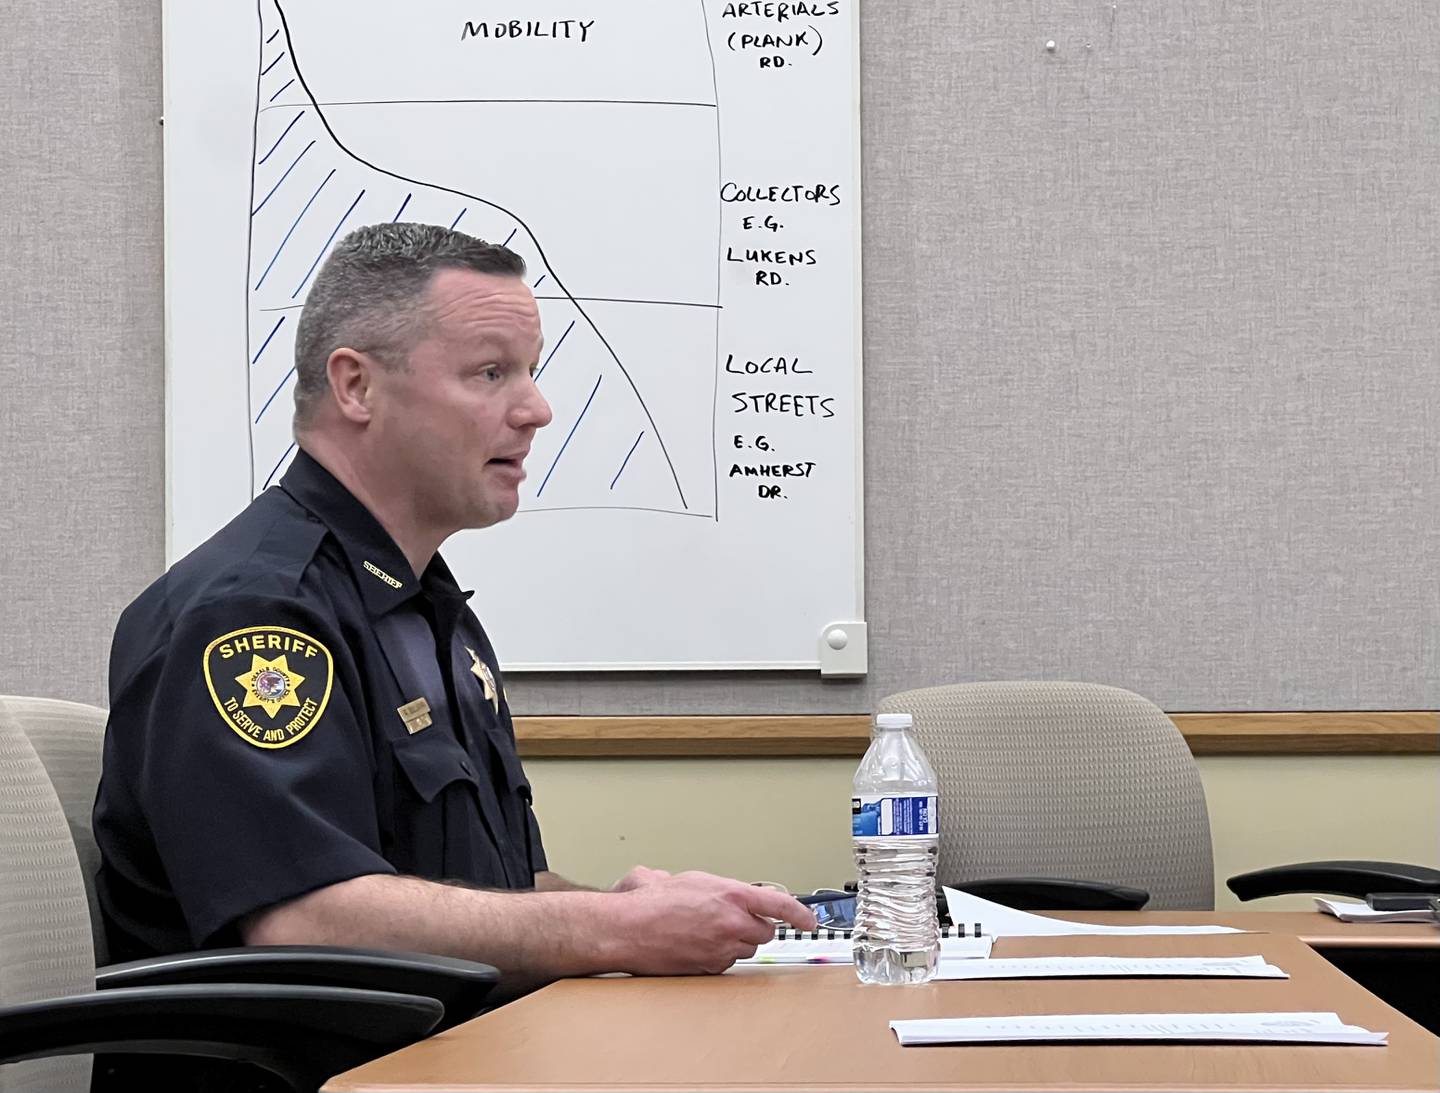 DeKalb County Sheriff Andy Sullivan said crime was down in DeKalb County, when he presented the DeKalb County Sheriff's Office 2022 annual report to the DeKalb County Board Law and Justice Committee on May 22, 2023.